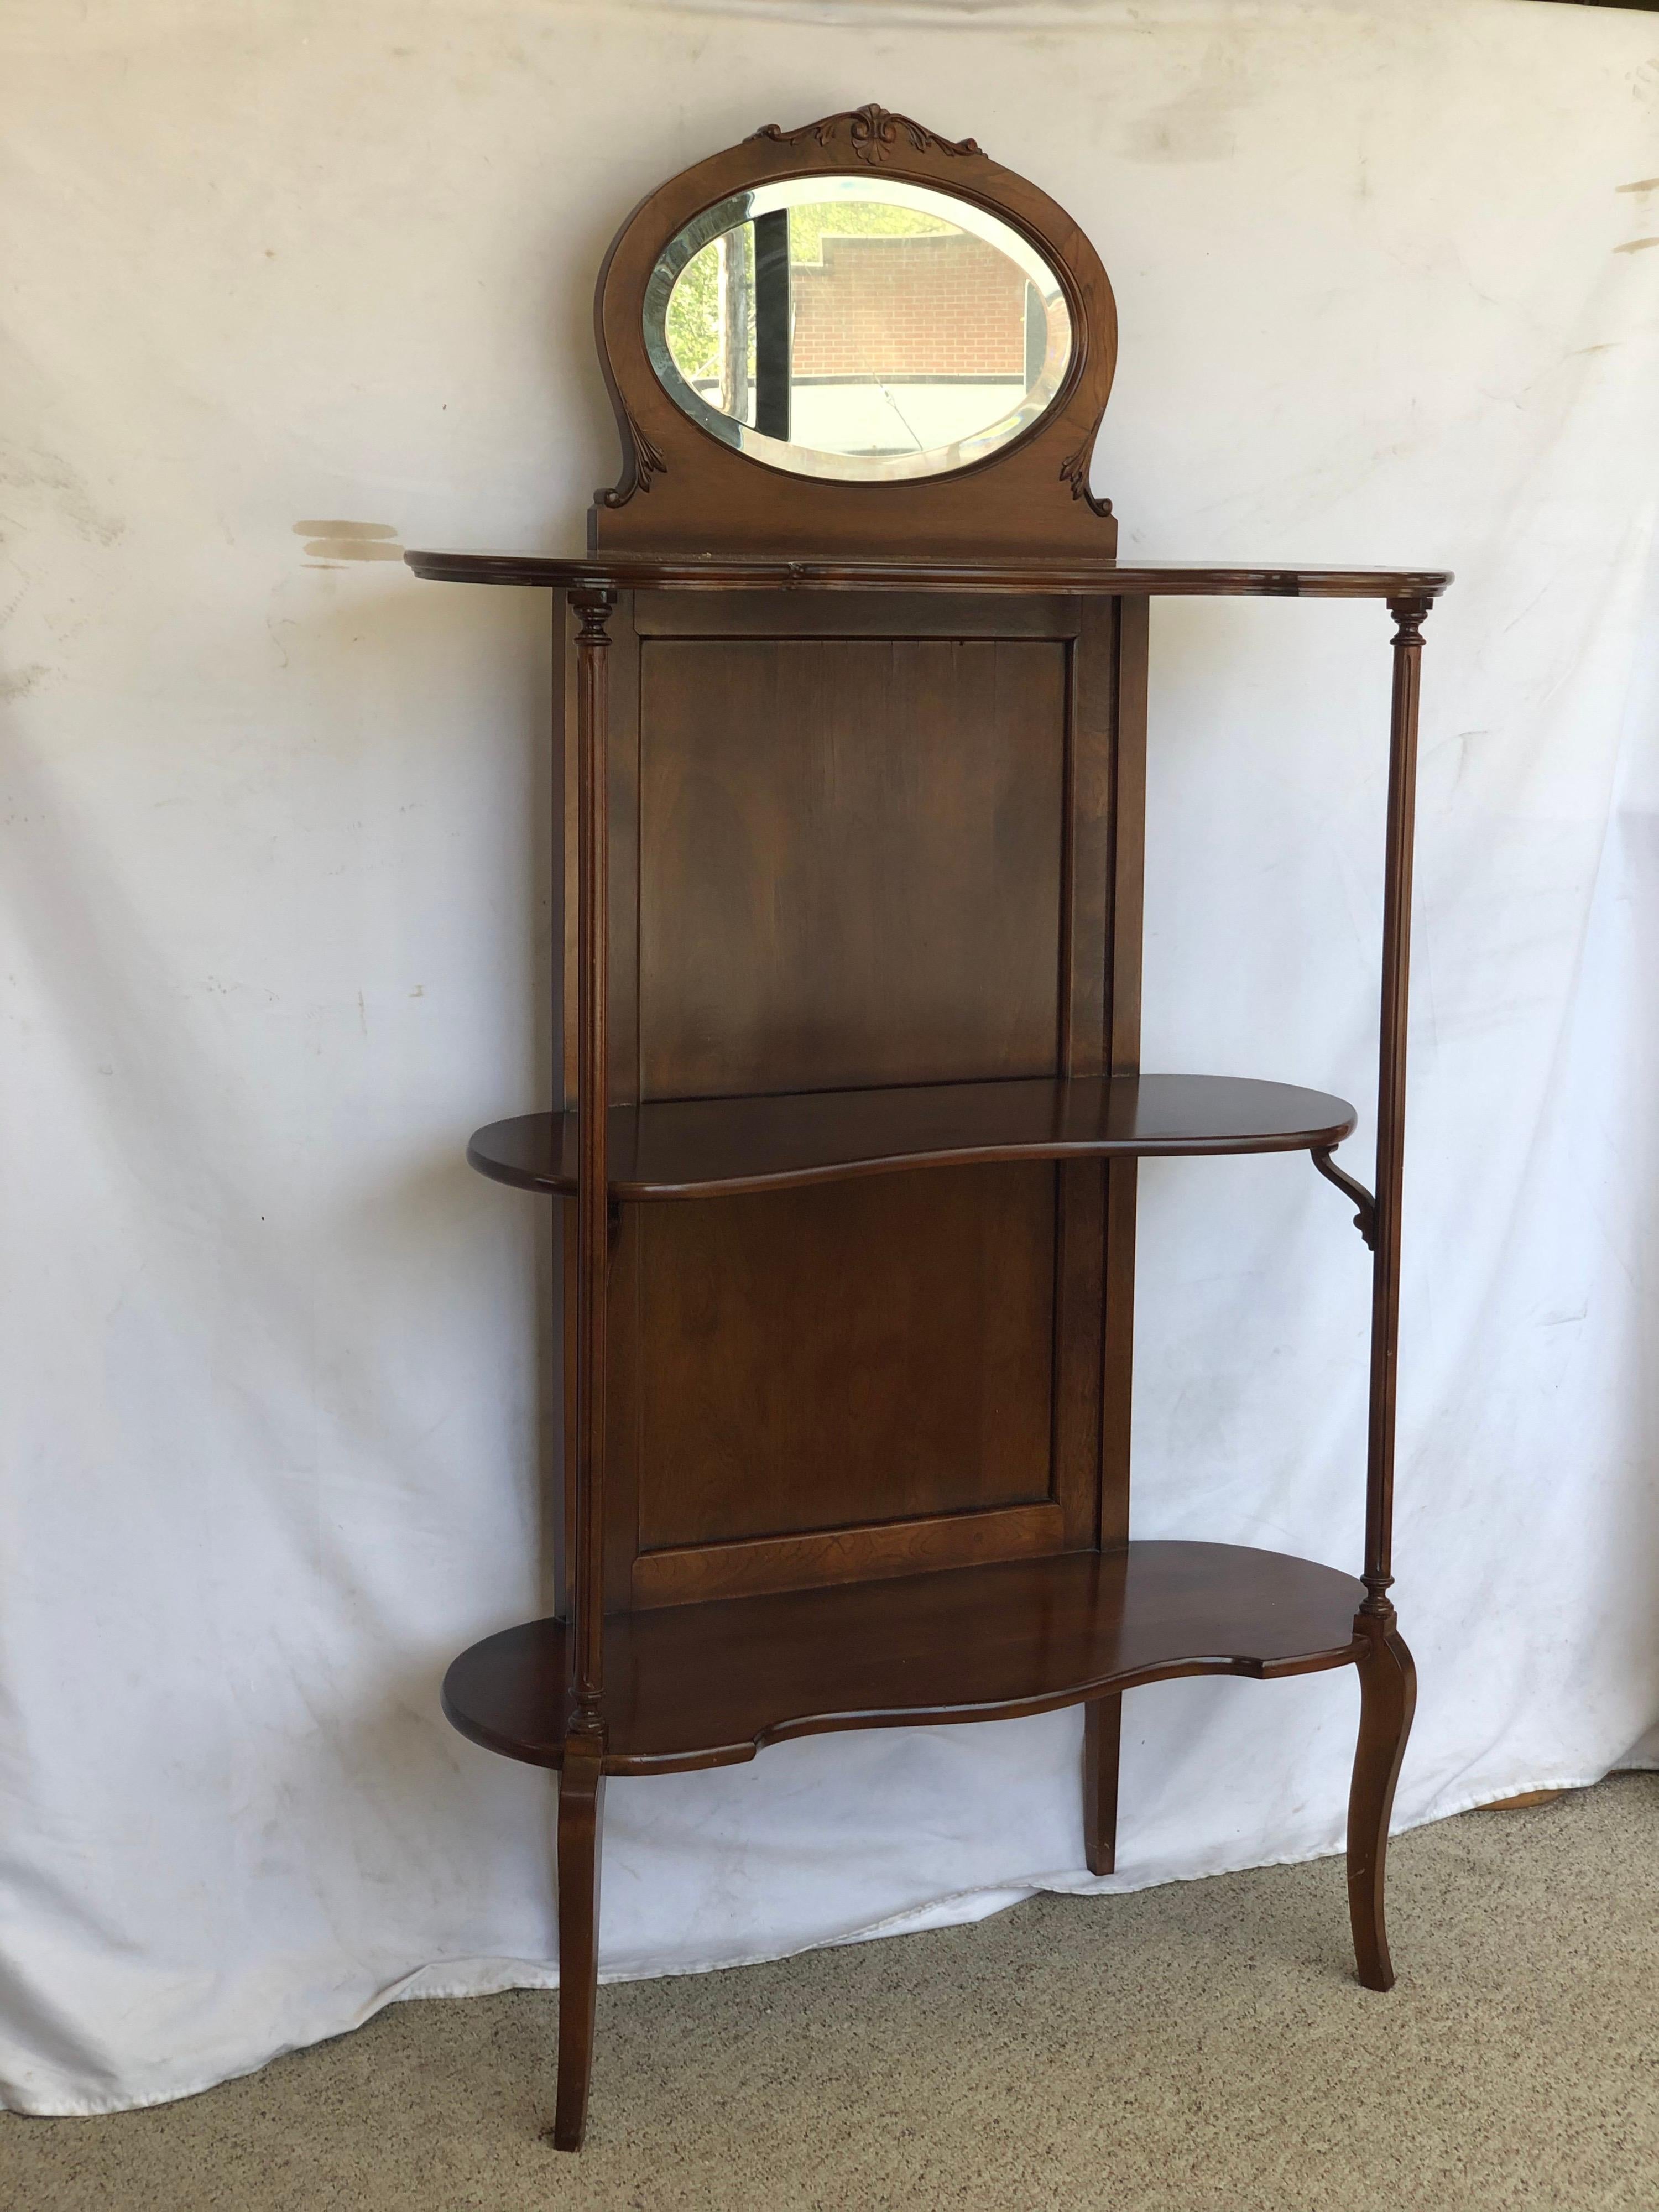 Mid-20th Century Vintage Victorian Style Mahogany Bookcase or Entryway Storage Stand For Sale